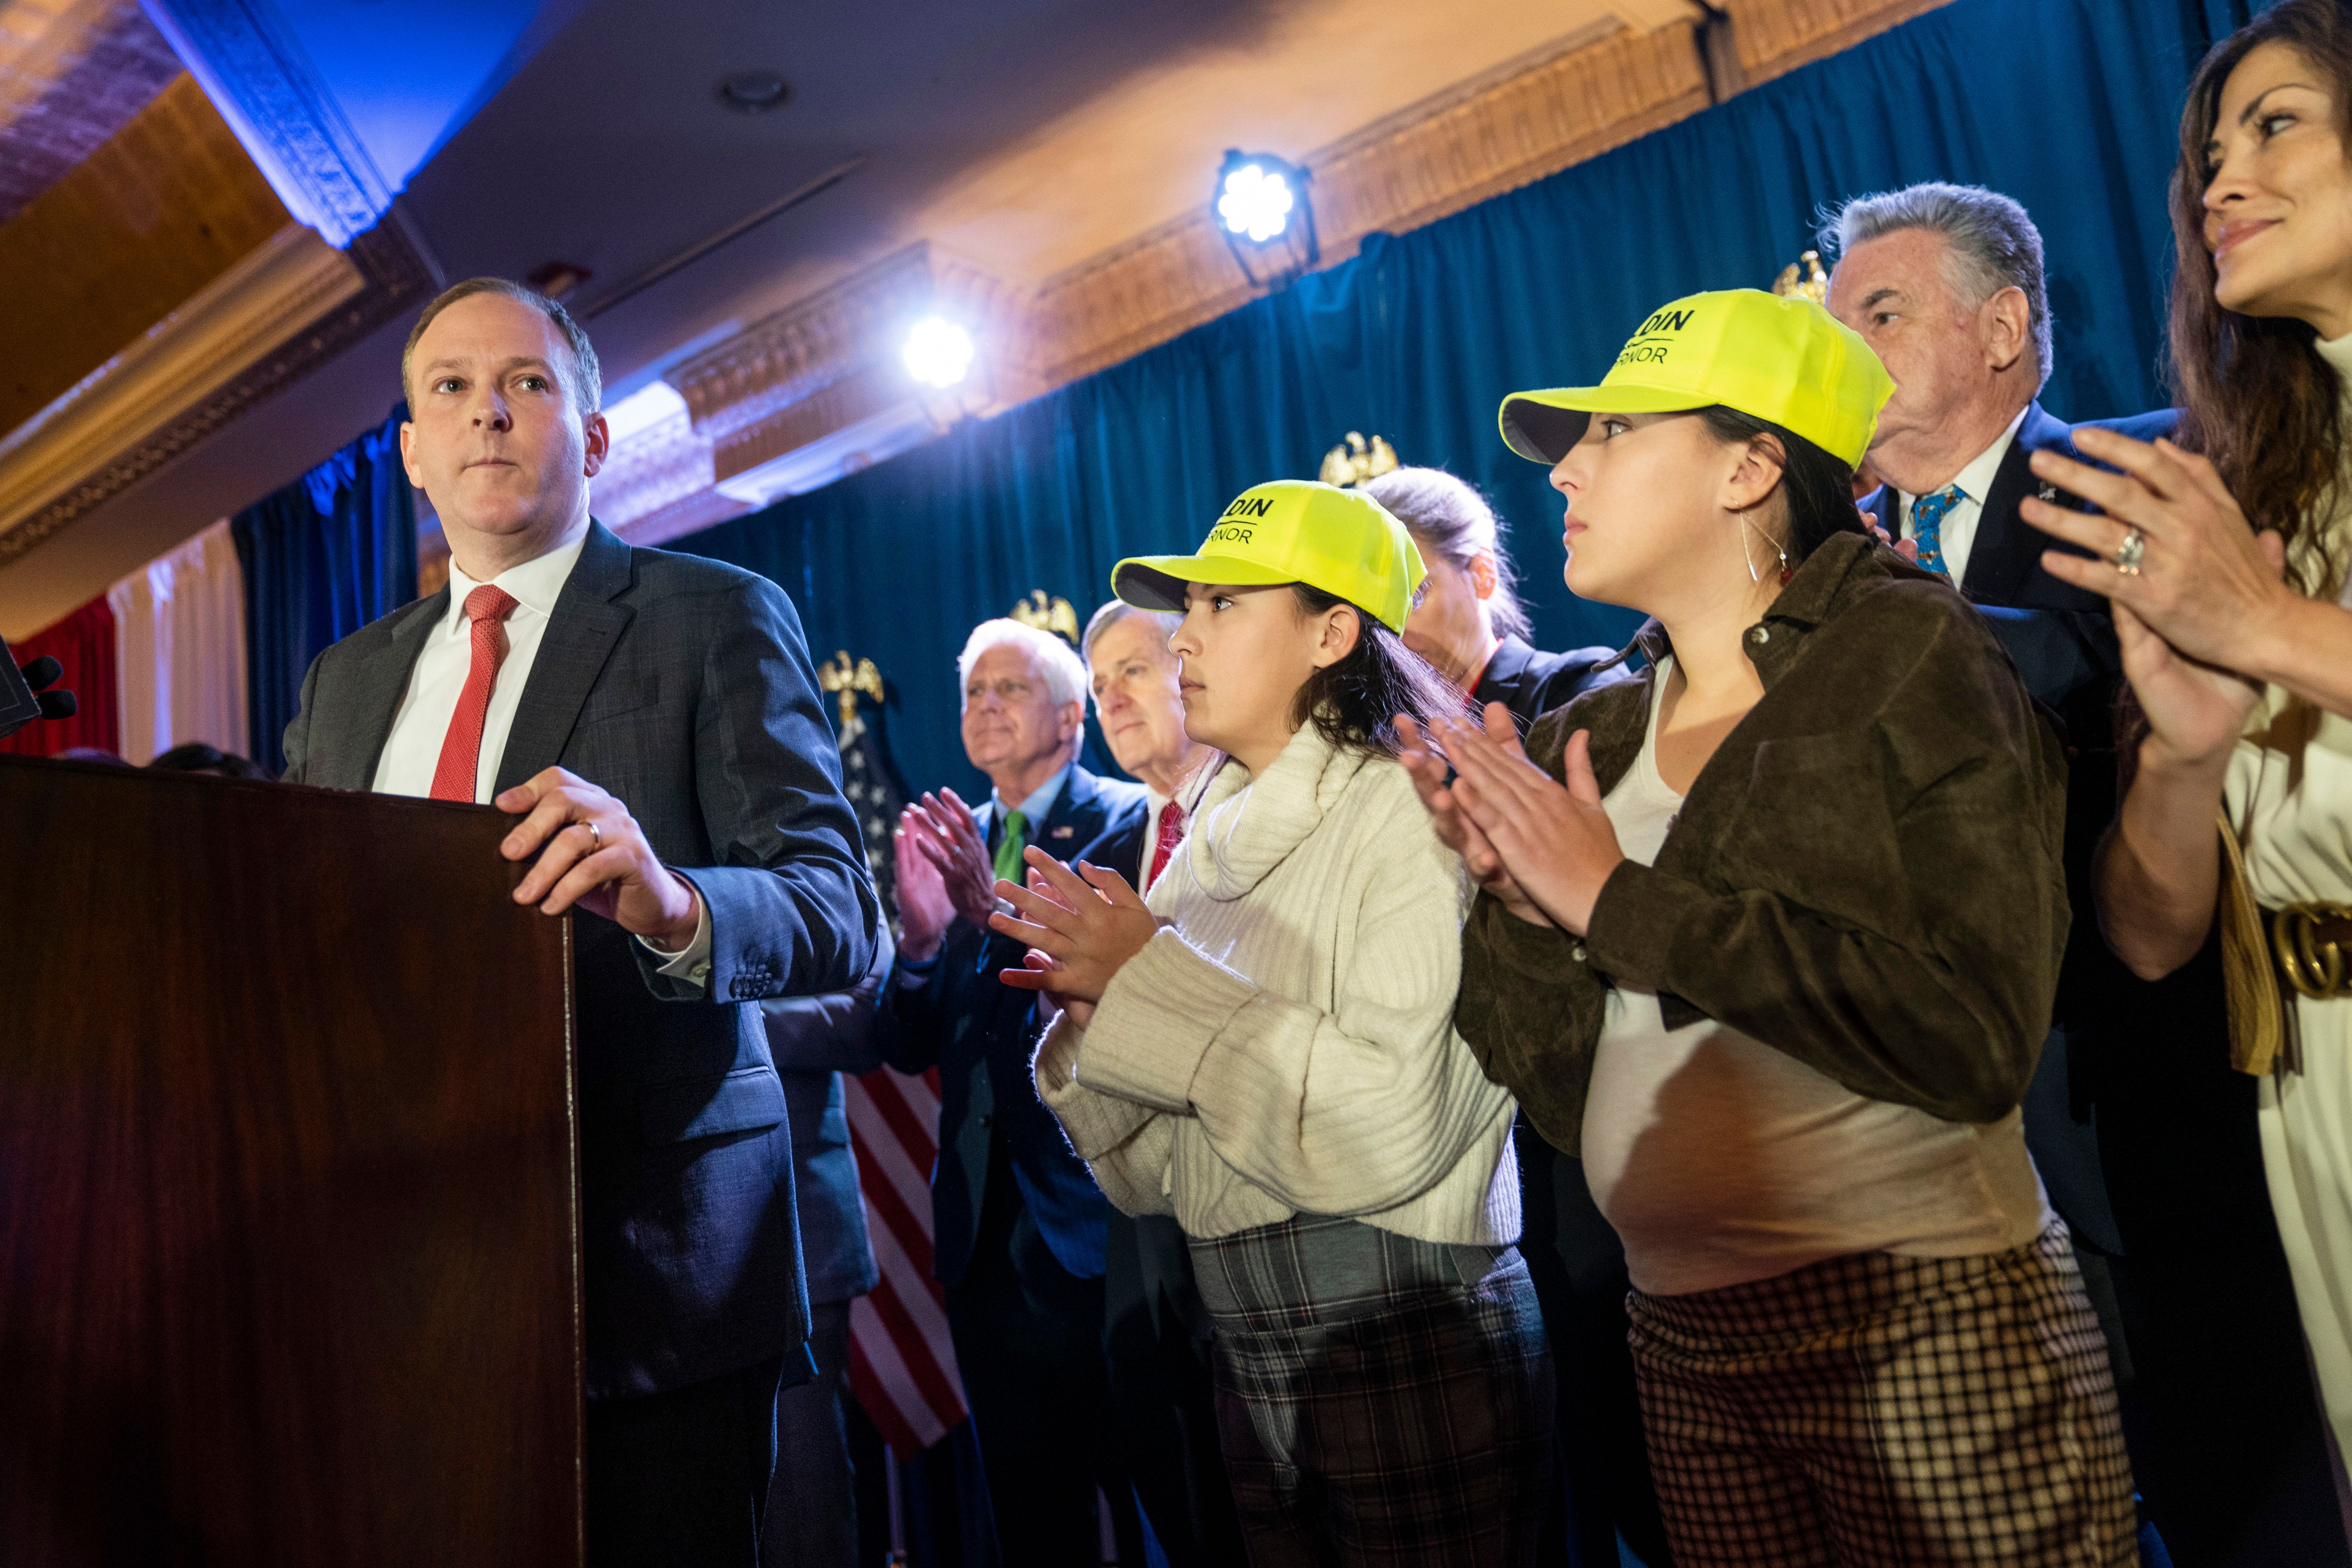 Rep. Lee Zeldin receives applause from supporters and his family as he speaks to delegates and assembled party officials at the 2022 NYGOP Convention, in Garden City, N.Y.